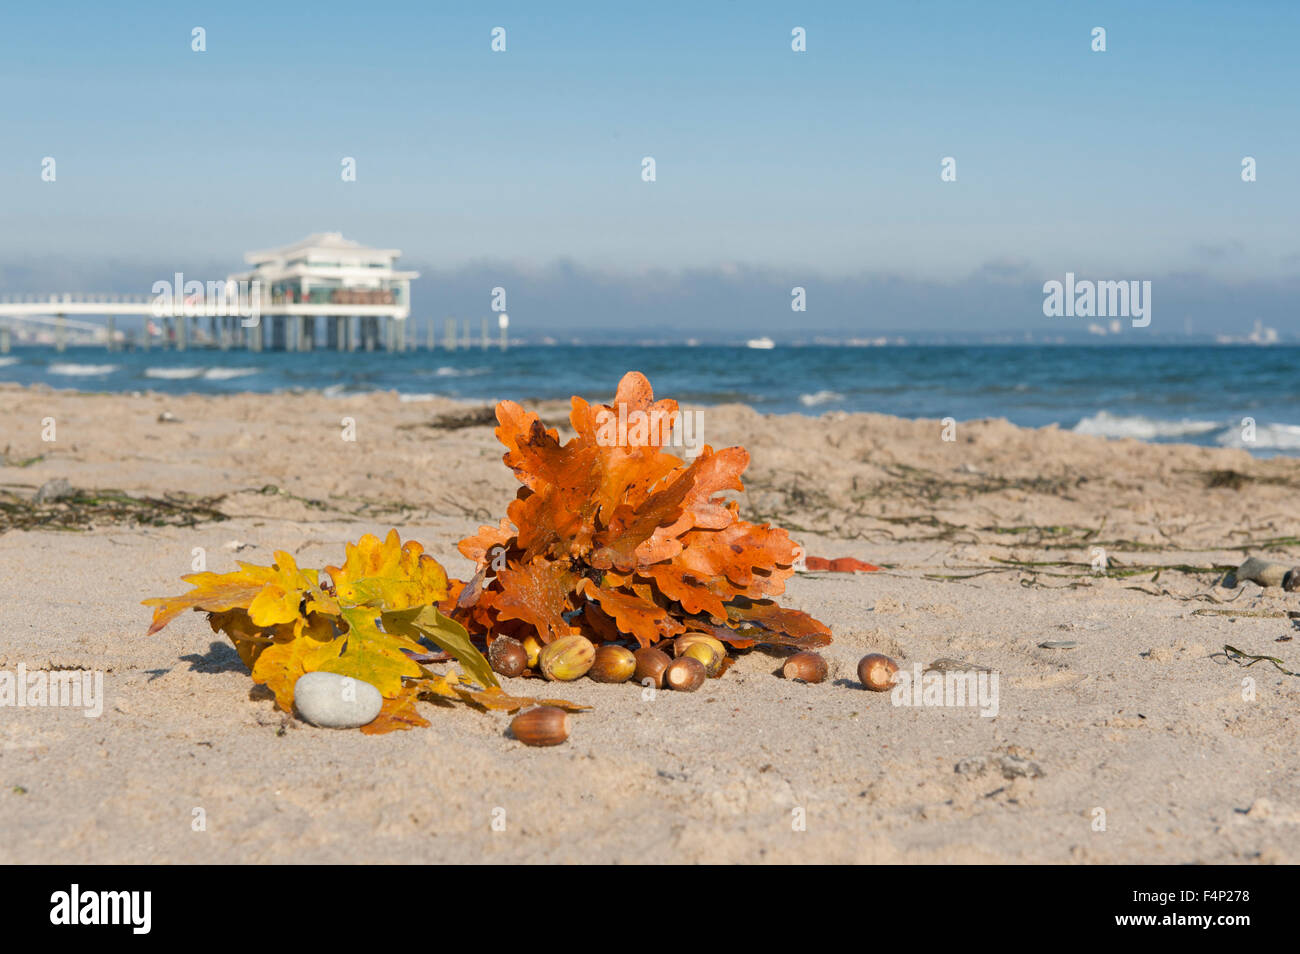 Coloured oak leaves found in autumn on the beach of Timmendorfer Strand, a Northern German seaside resort on the Baltic coast Stock Photo